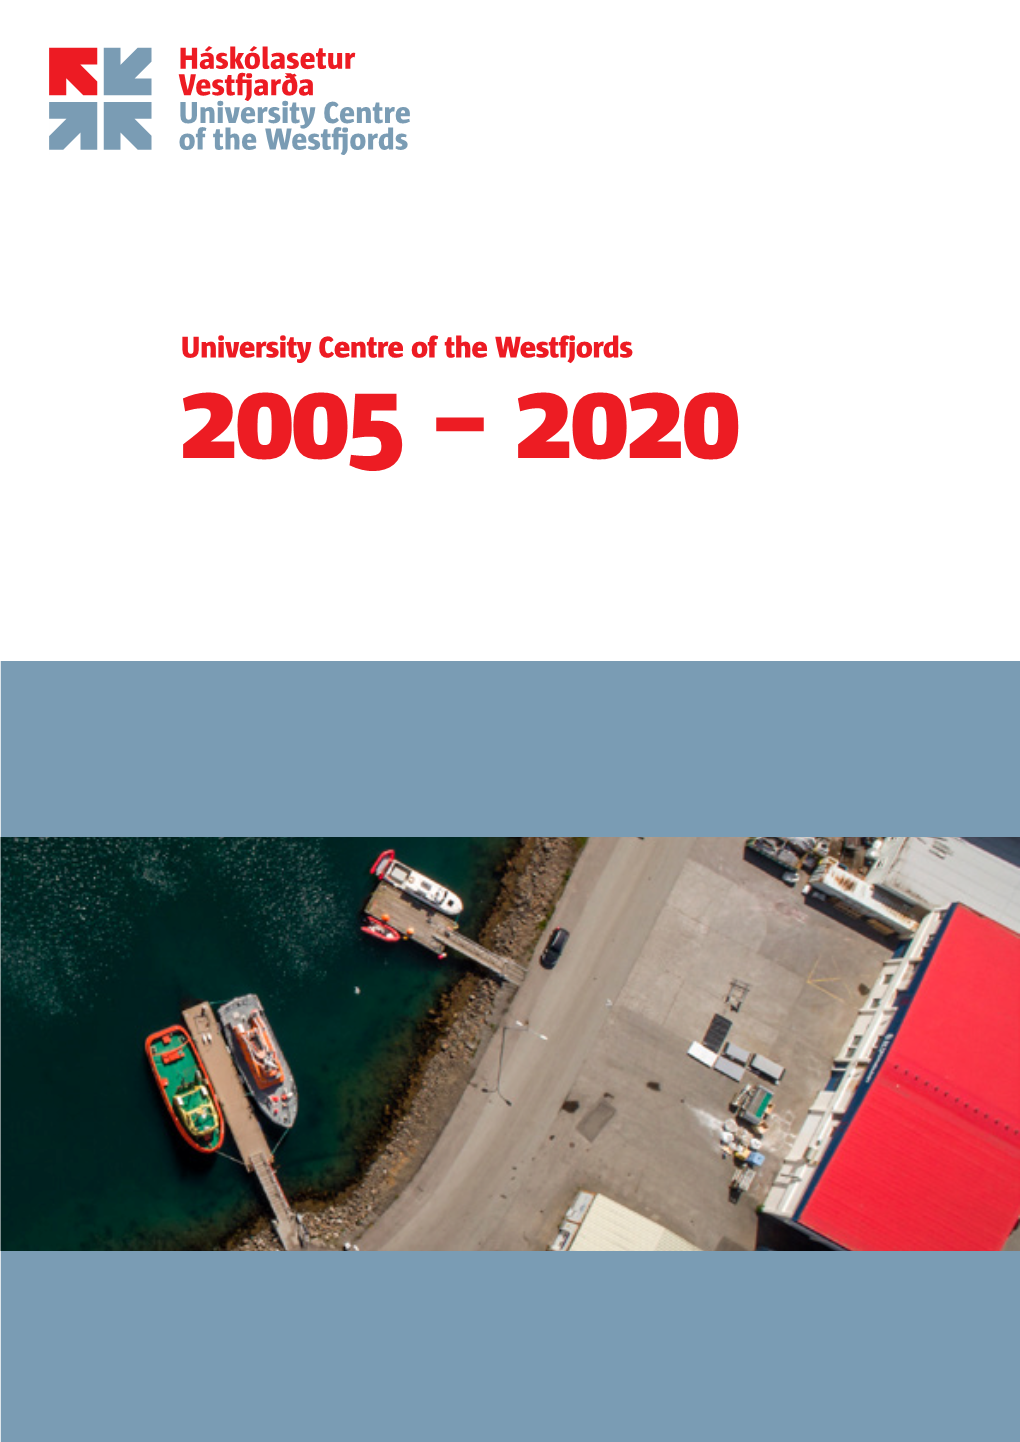 Fifteen Year Report of the University Centre of the Westfjords